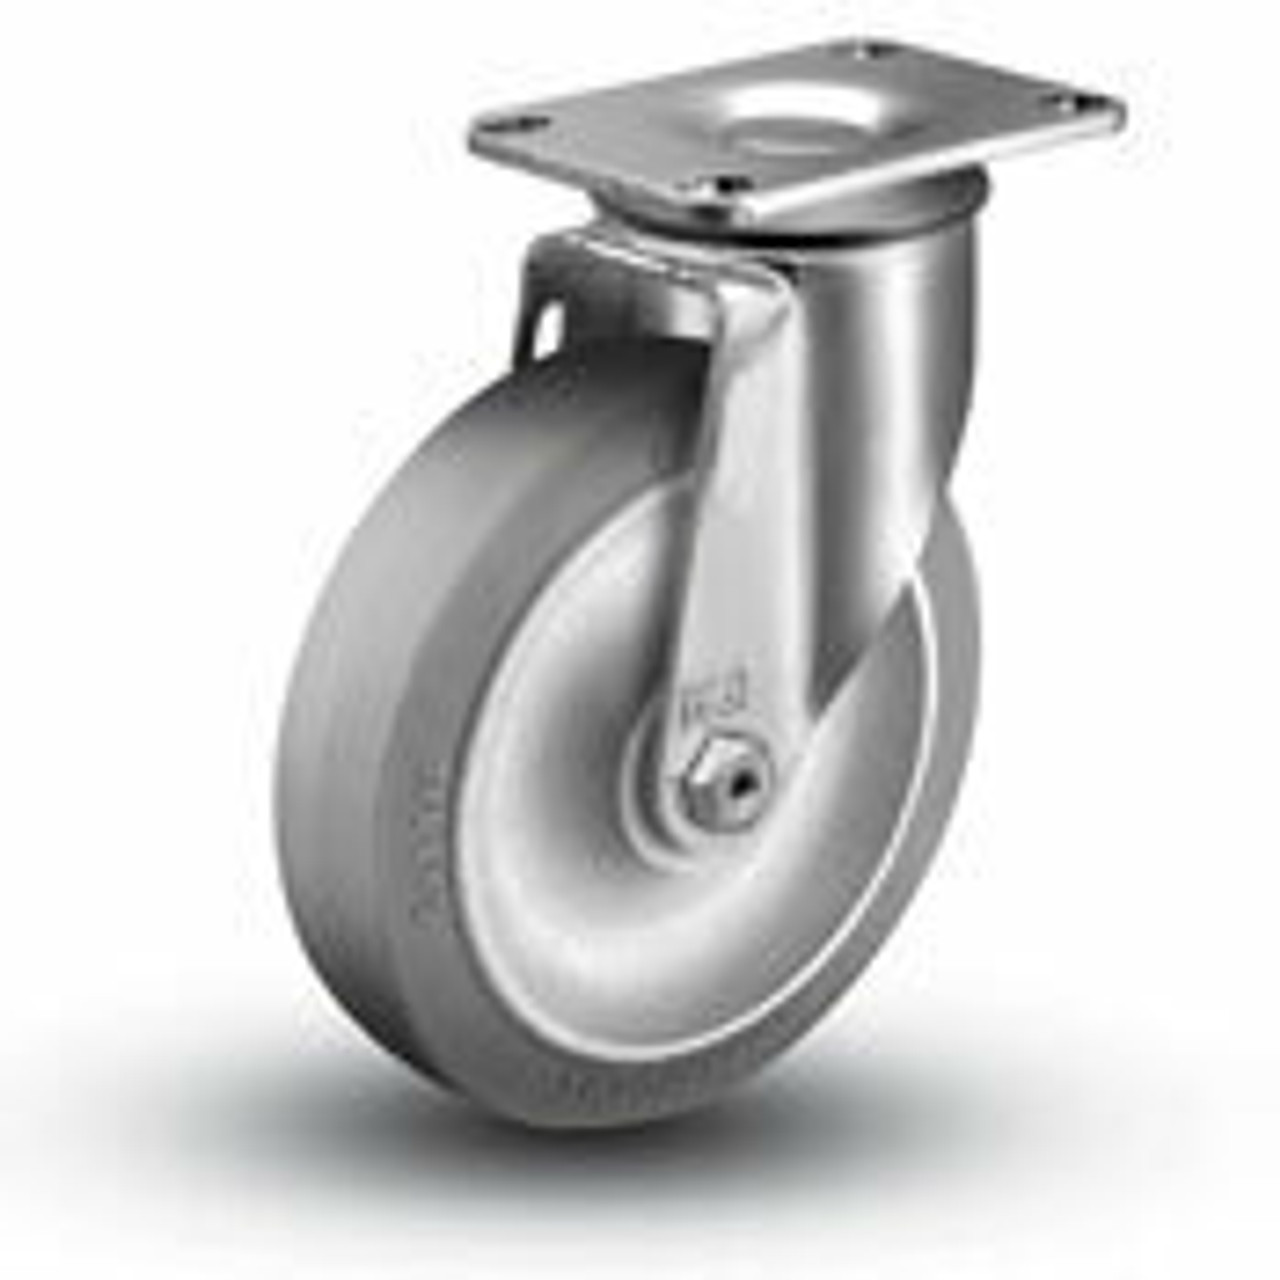 4‚Äù swivel caster has a grey performa rubber wheel and has a load capacity of 300 lbs.